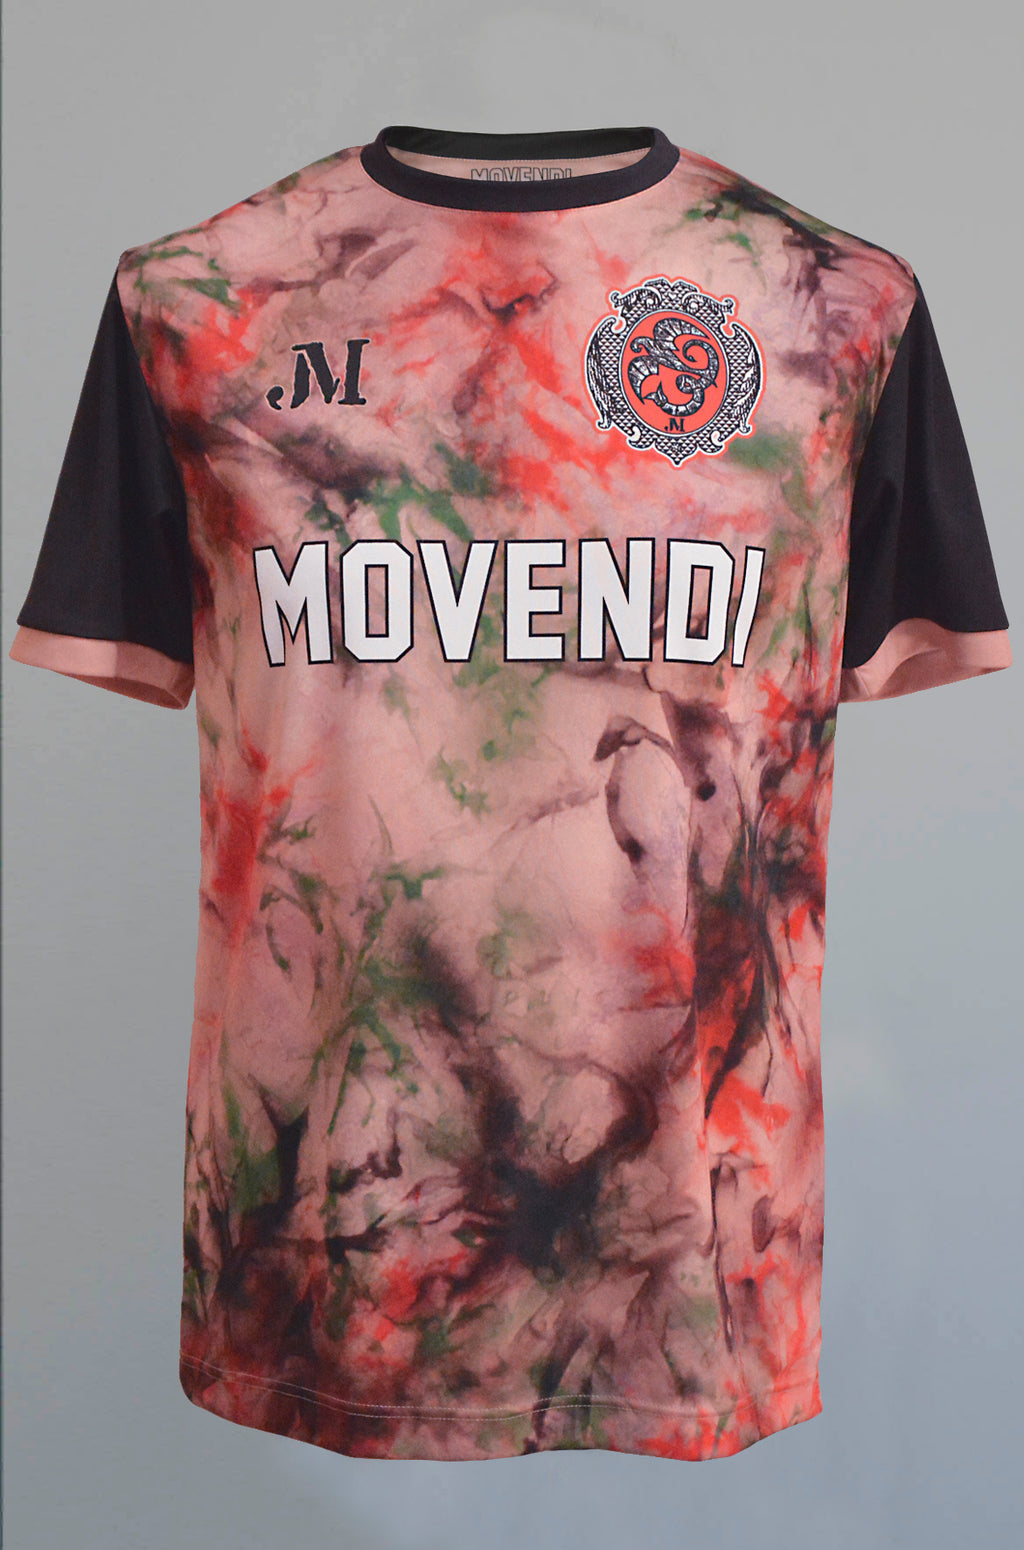 T-SHIRT MOVENDI TIE AND DYE